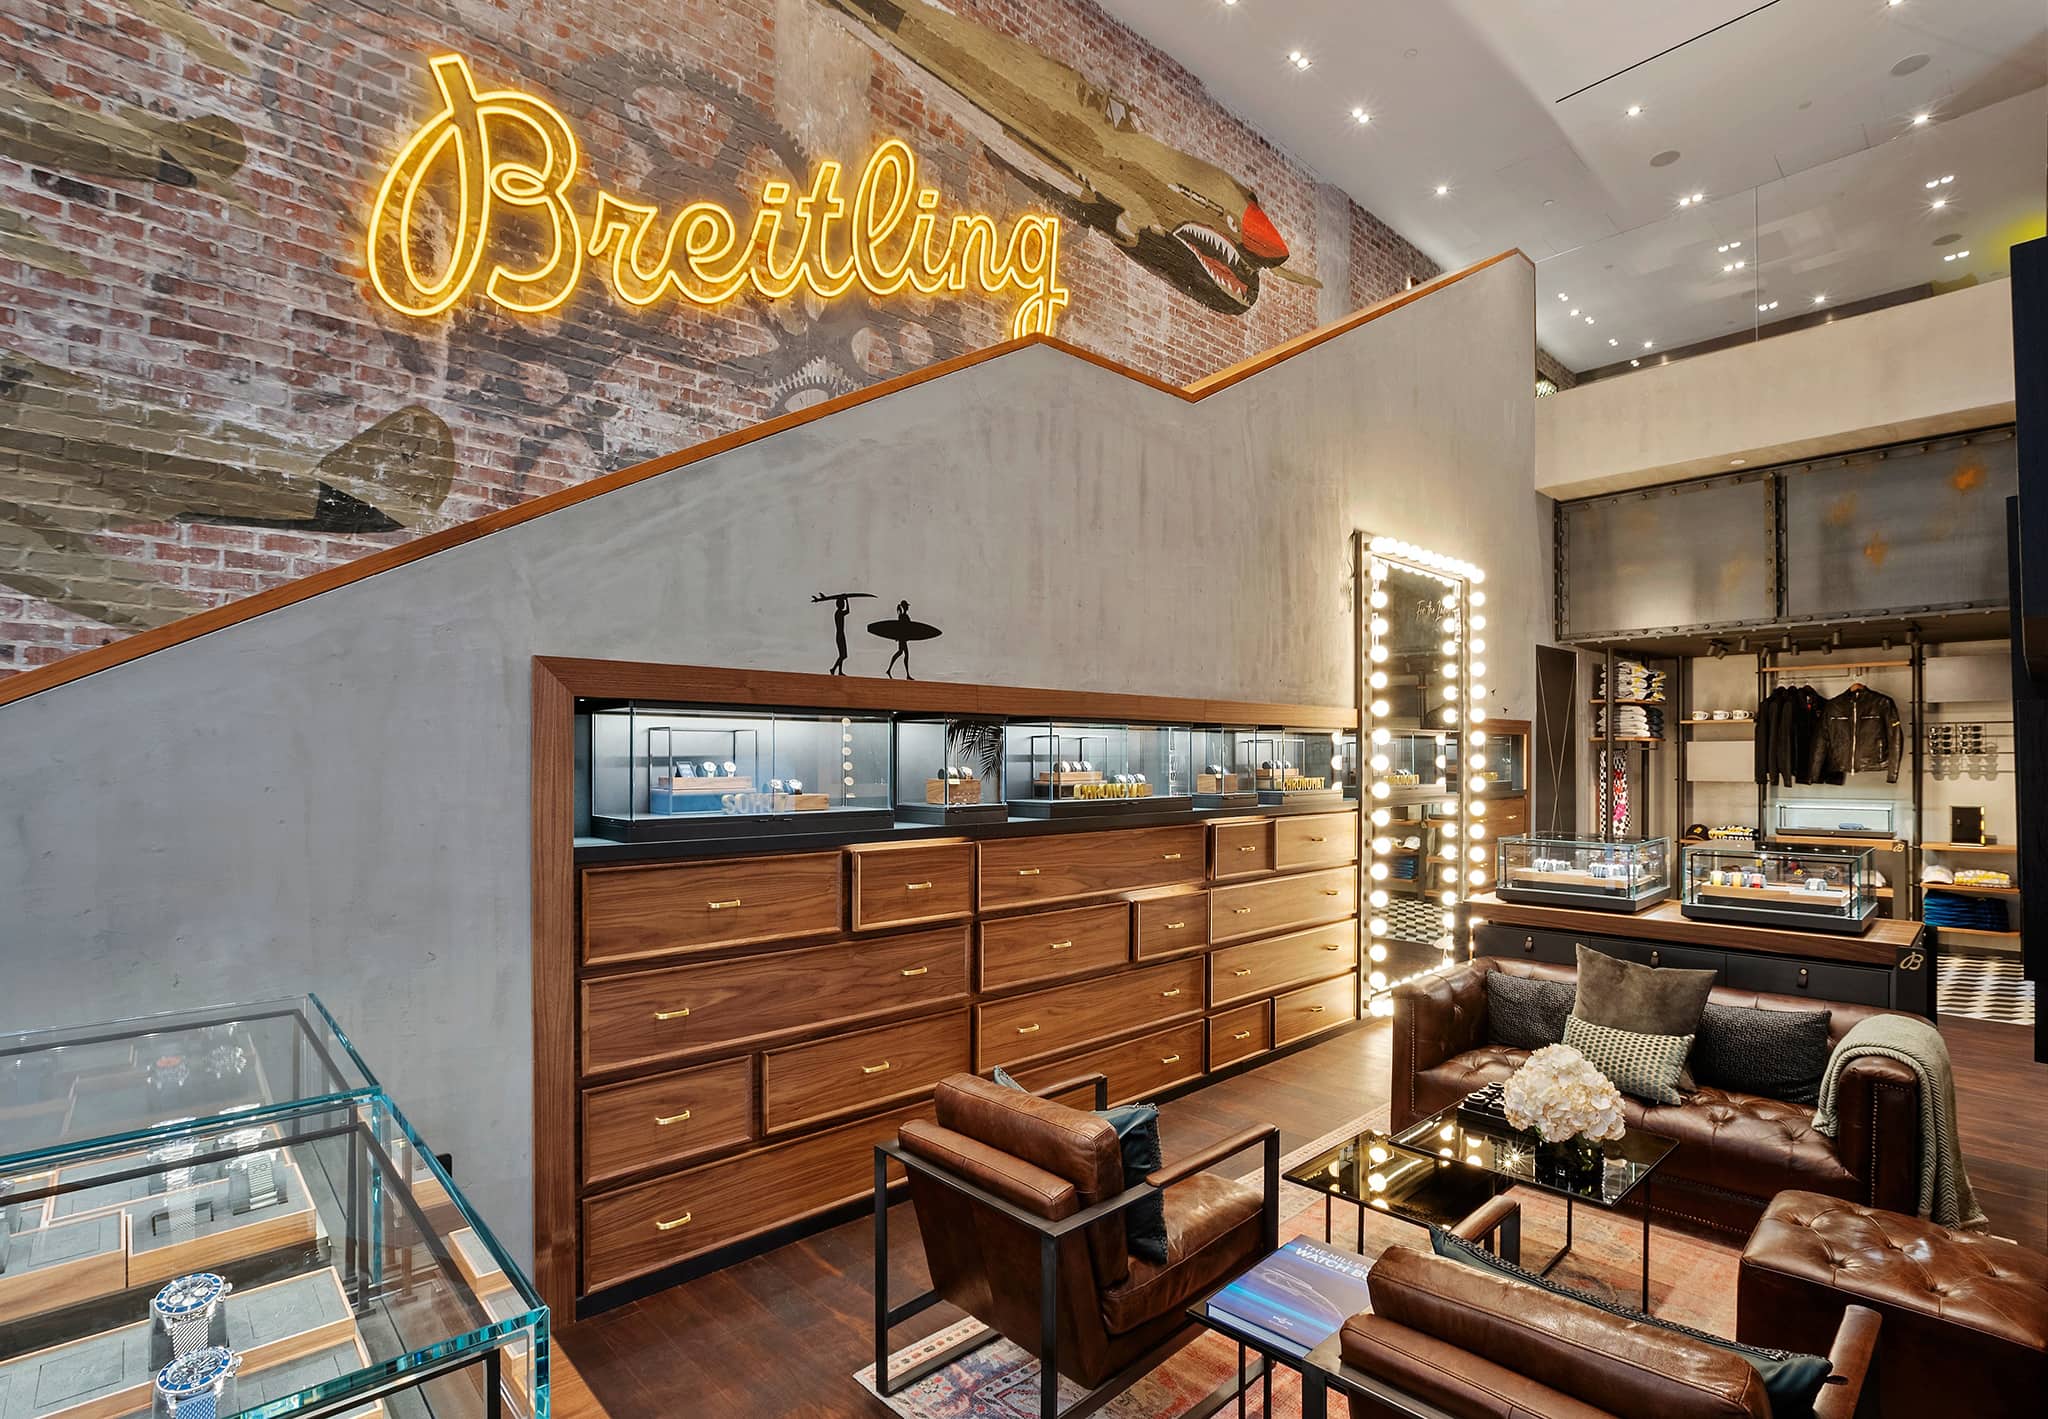 The Madison Avenue store redesign is based on the distinctive industrial-loft aesthetic that is already a defining part of Breitling's top global retail locations